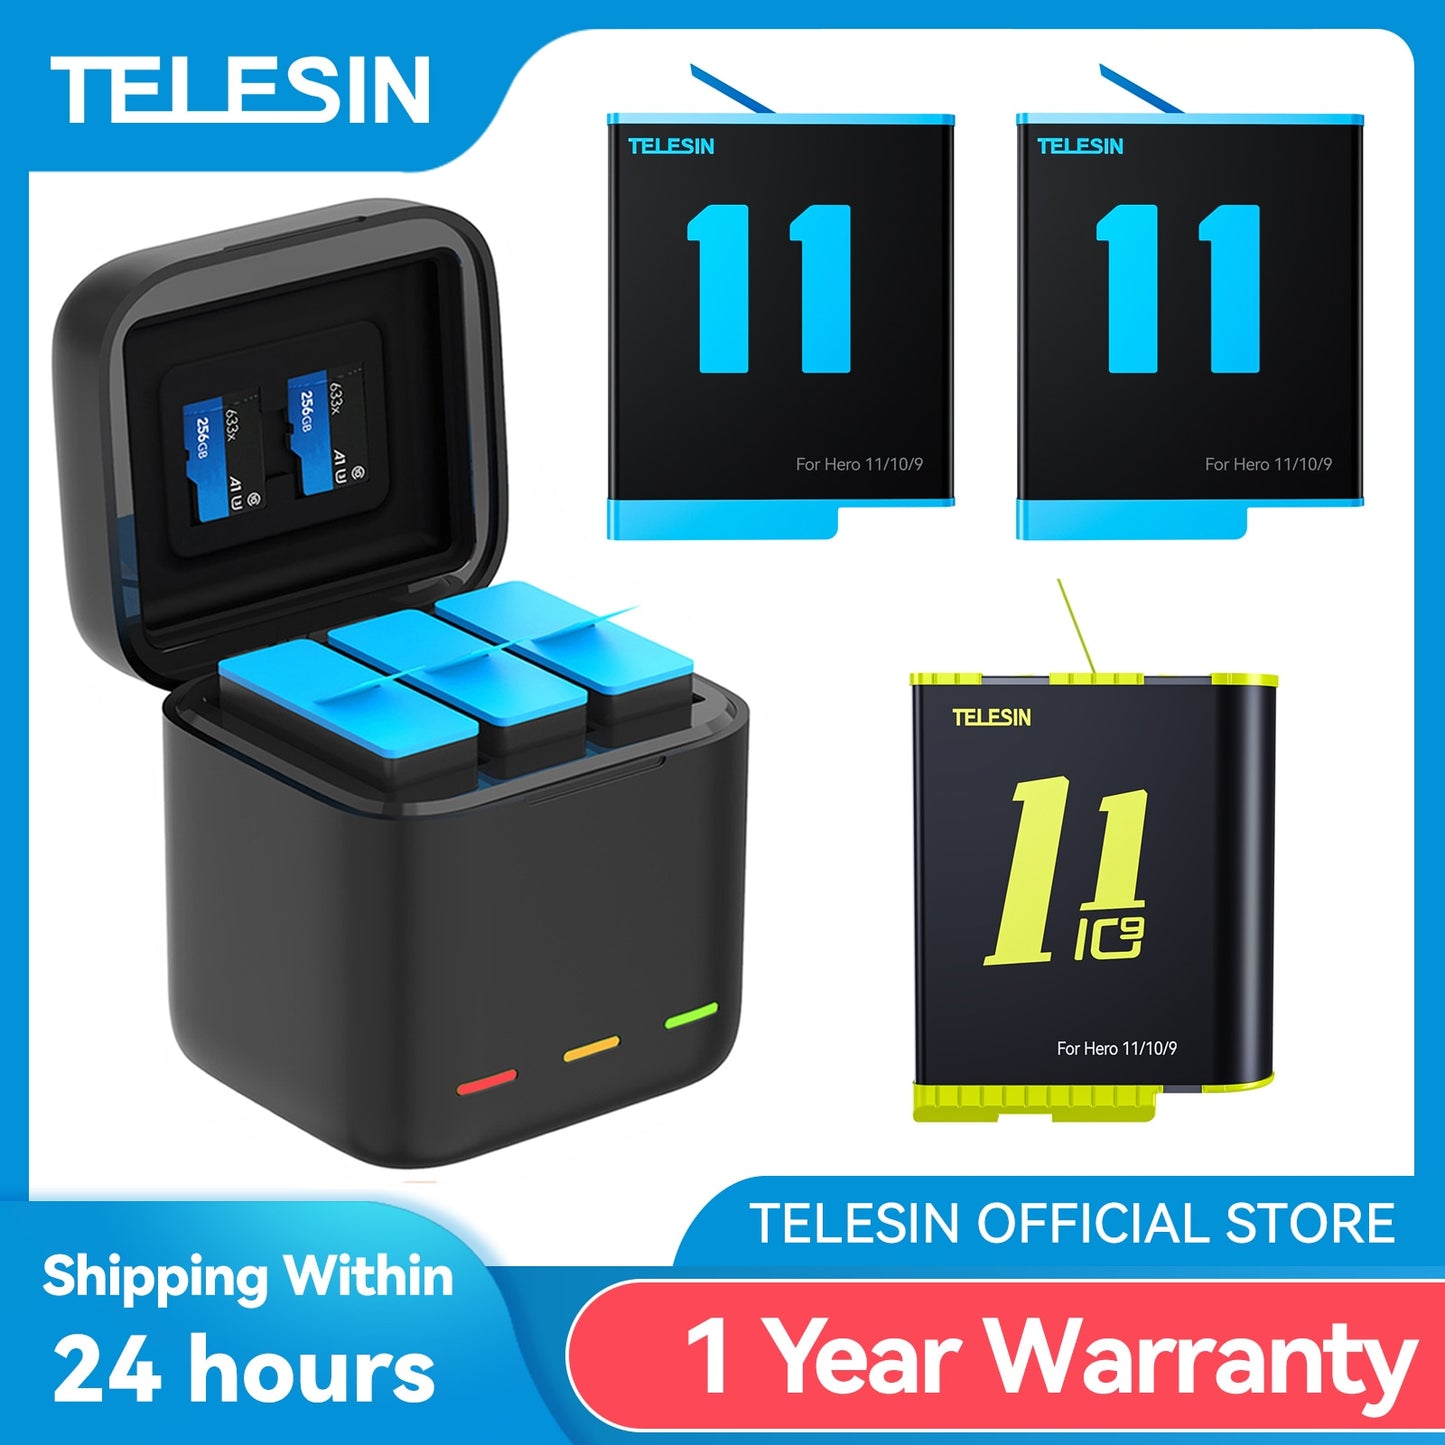 TELESIN Battery For GoPro Hero 10 11 1750 mAh Battery 3 Ways Fast Charger Box TF Card Storage For GoPro Hero 9 Accessories - lebenoutdoors